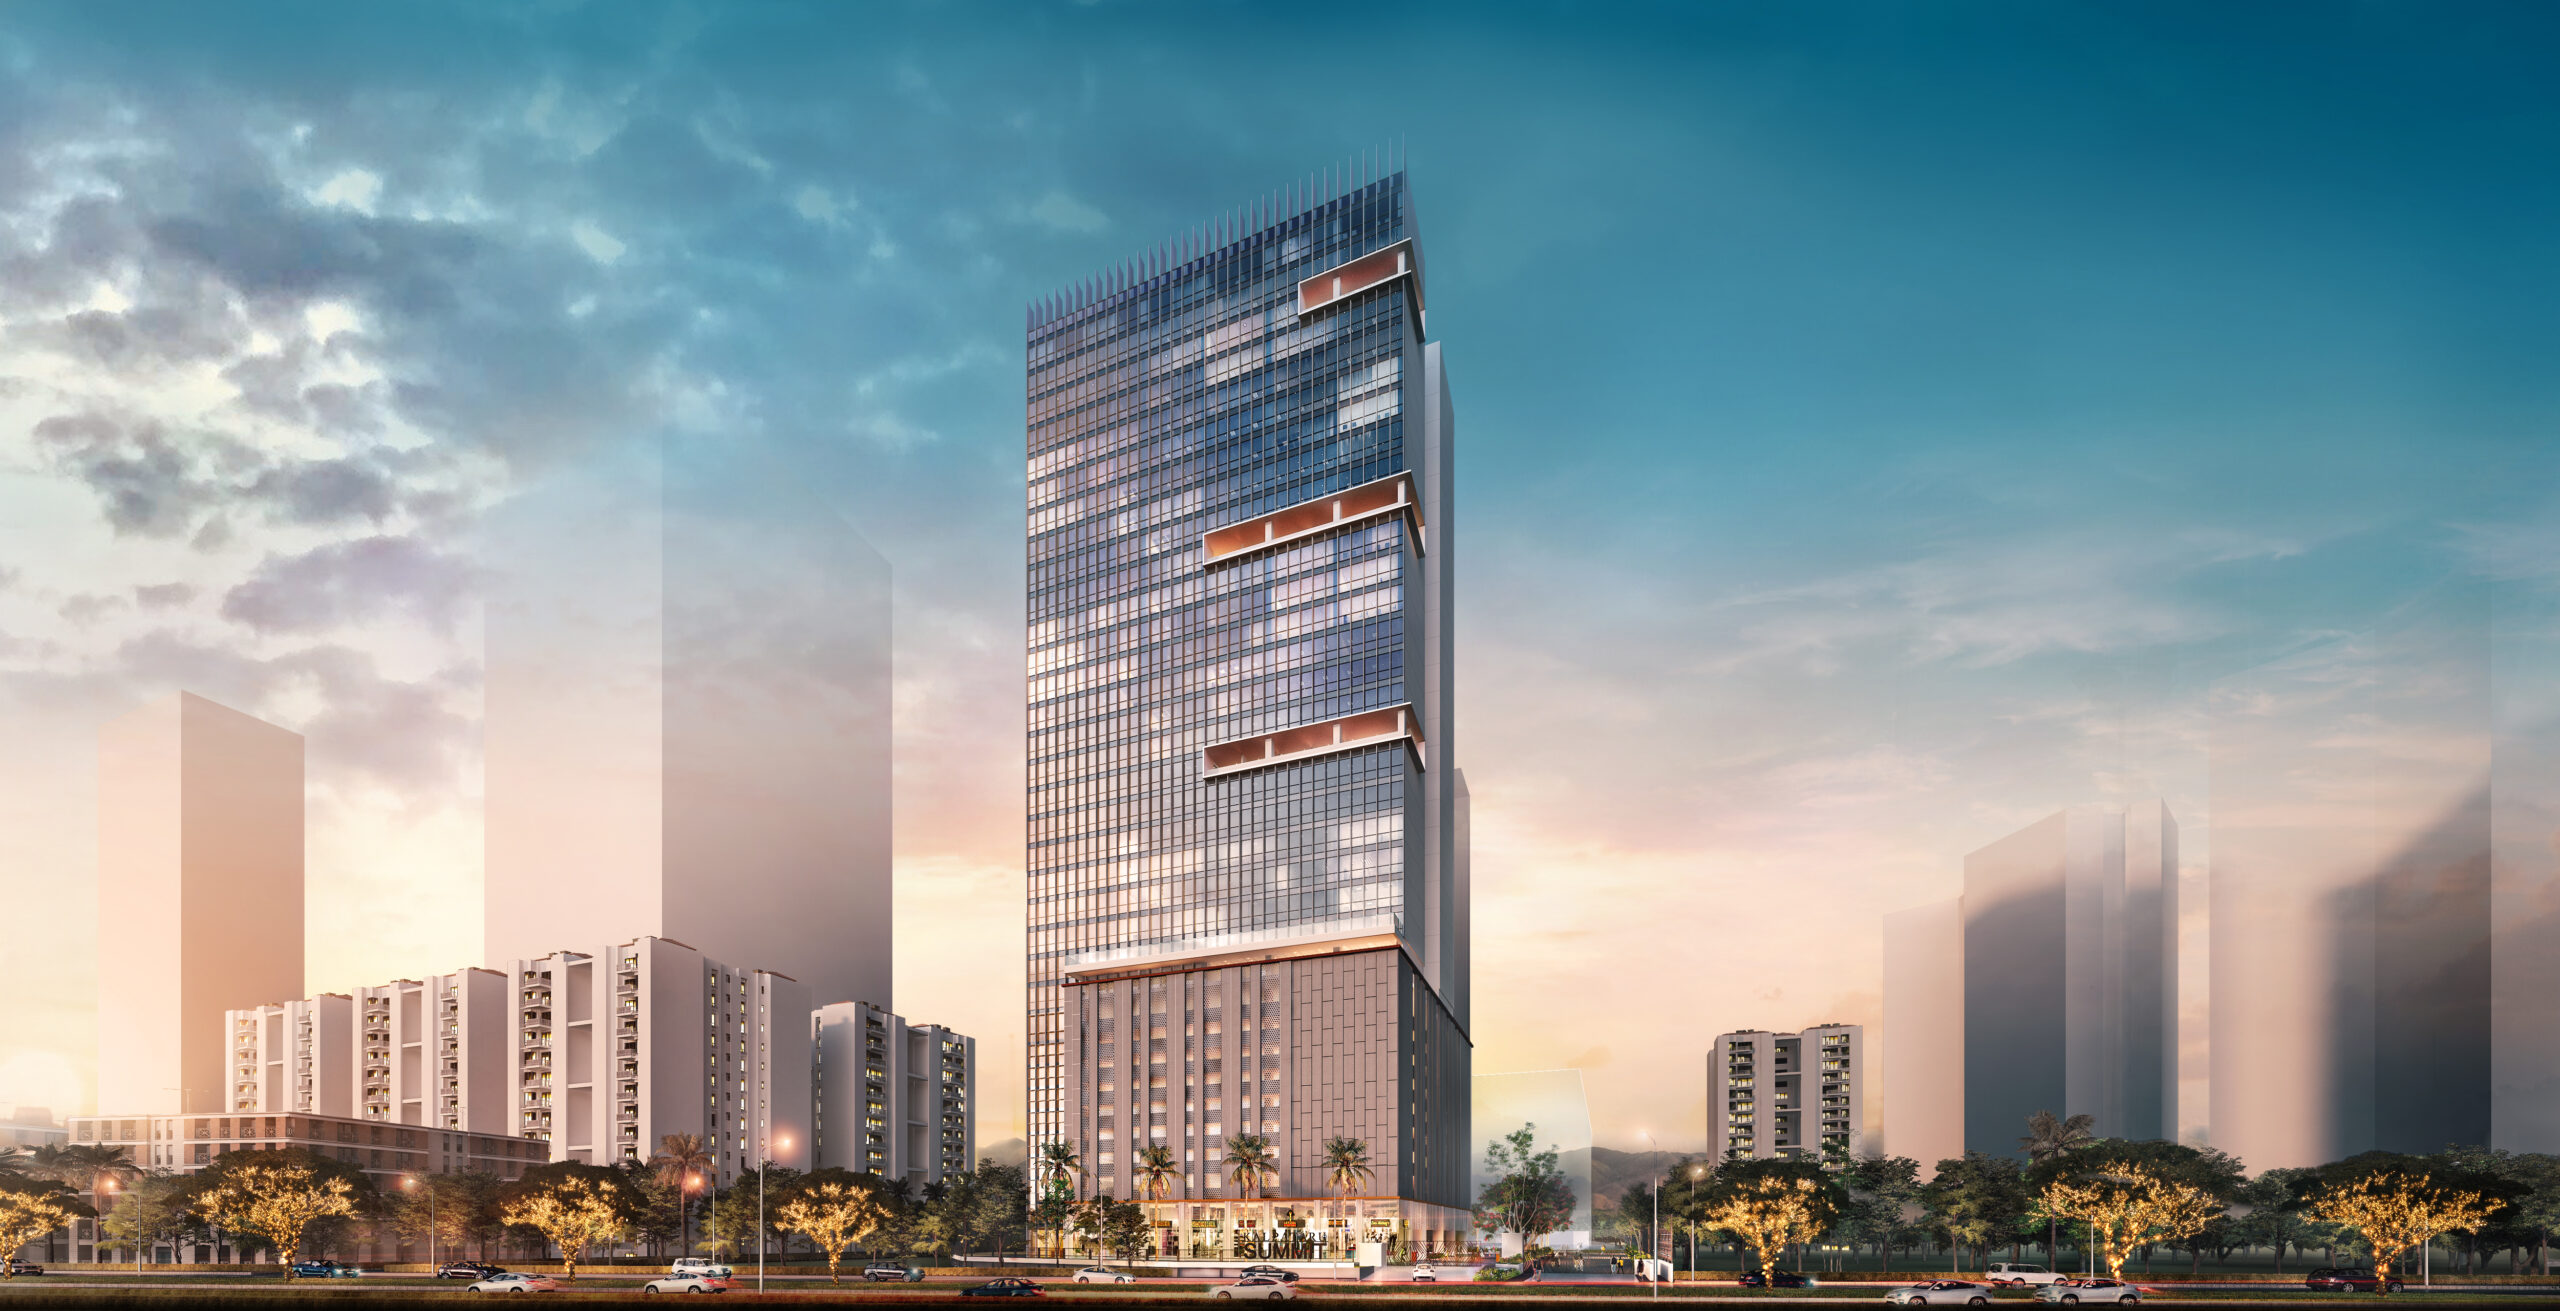 kalpataru summit, L.B.S Marg, Mulund west, Central Suburb Mumbai, Commerical, Offices